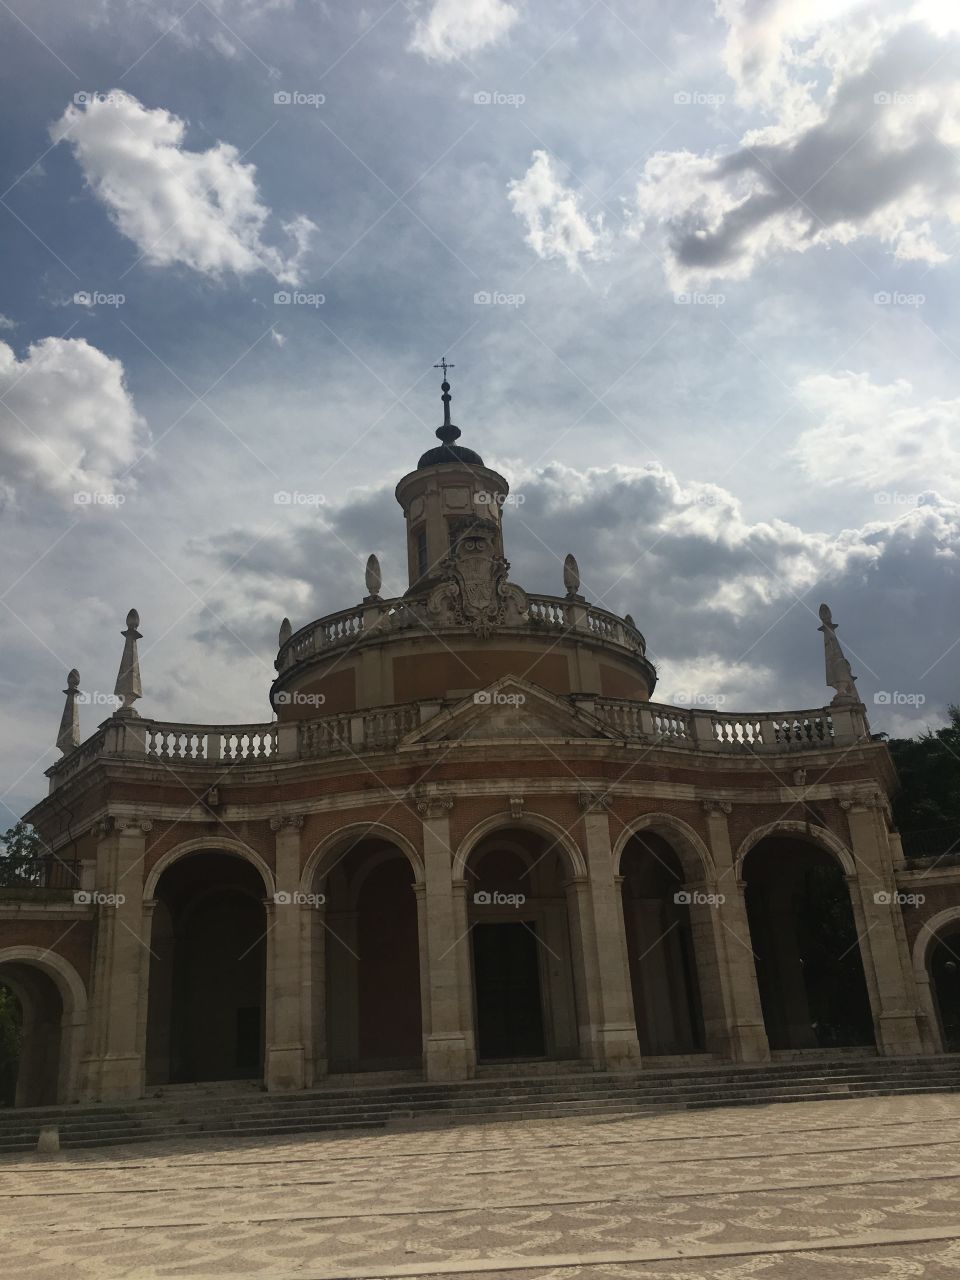 The main cathedral in Aranjuez, Madrid stand tall in the image with so many amazing details. From the column pillars holding up the arches and the  the smaller pillar reaching up to the sky filled with flush clouds. This cathedral looks heavenly. 